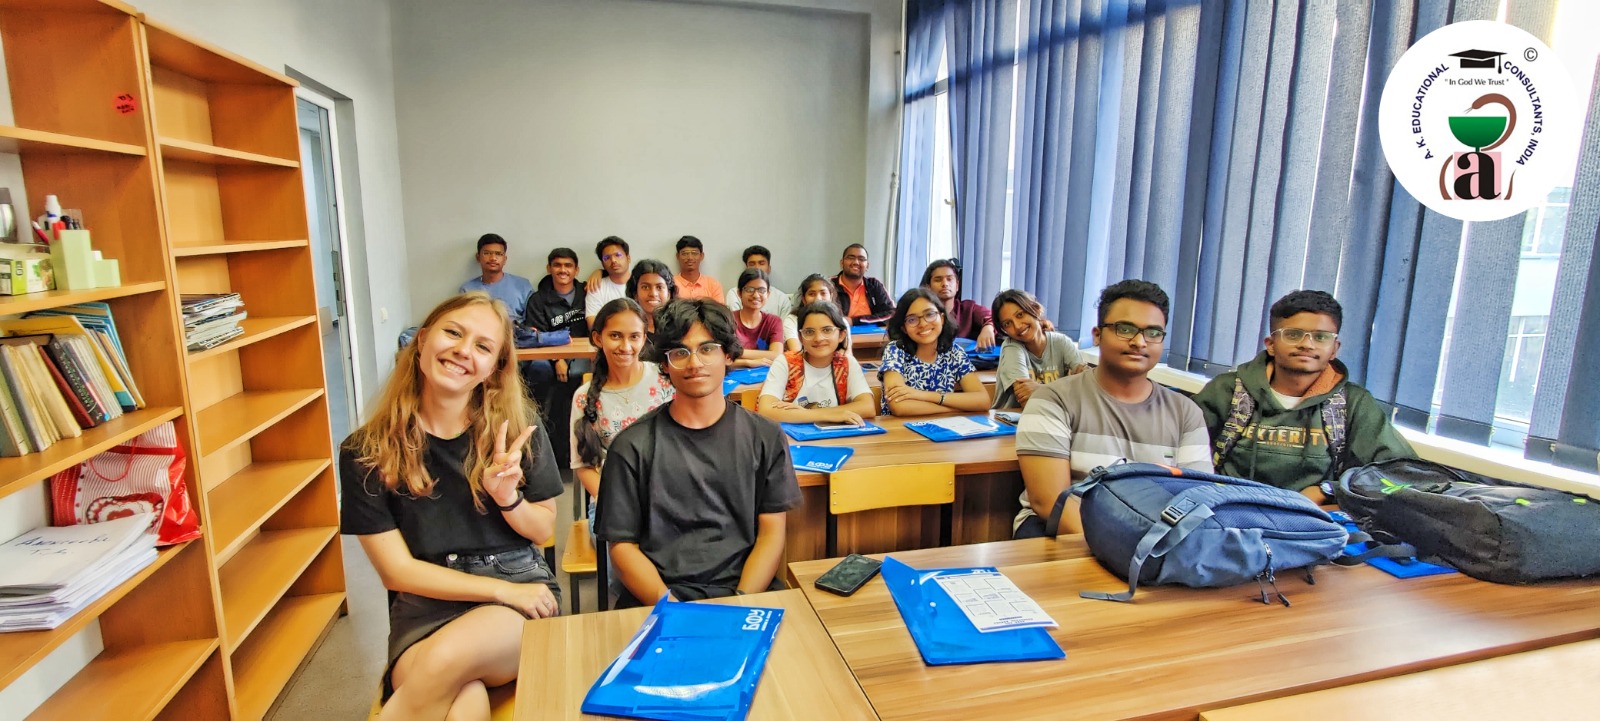 A.K.Educational Consultants help Indian students for adaptation at Immanuel Kant Baltic Federal University, Russia